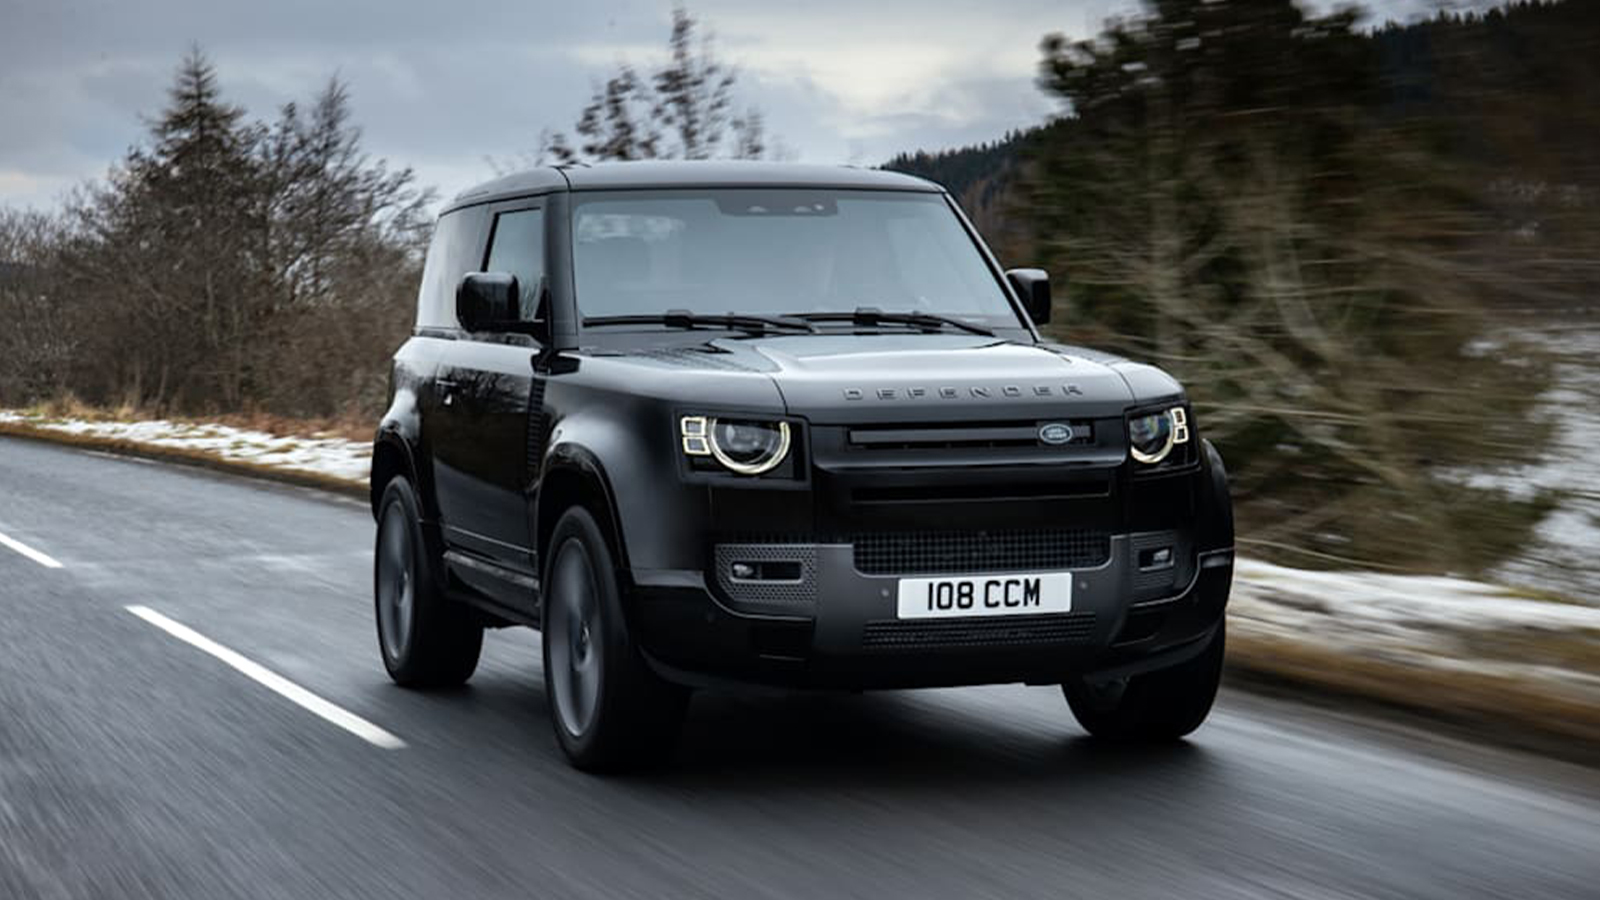 2022 Land Rover Defender Flexes 518-HP Worth Of ...